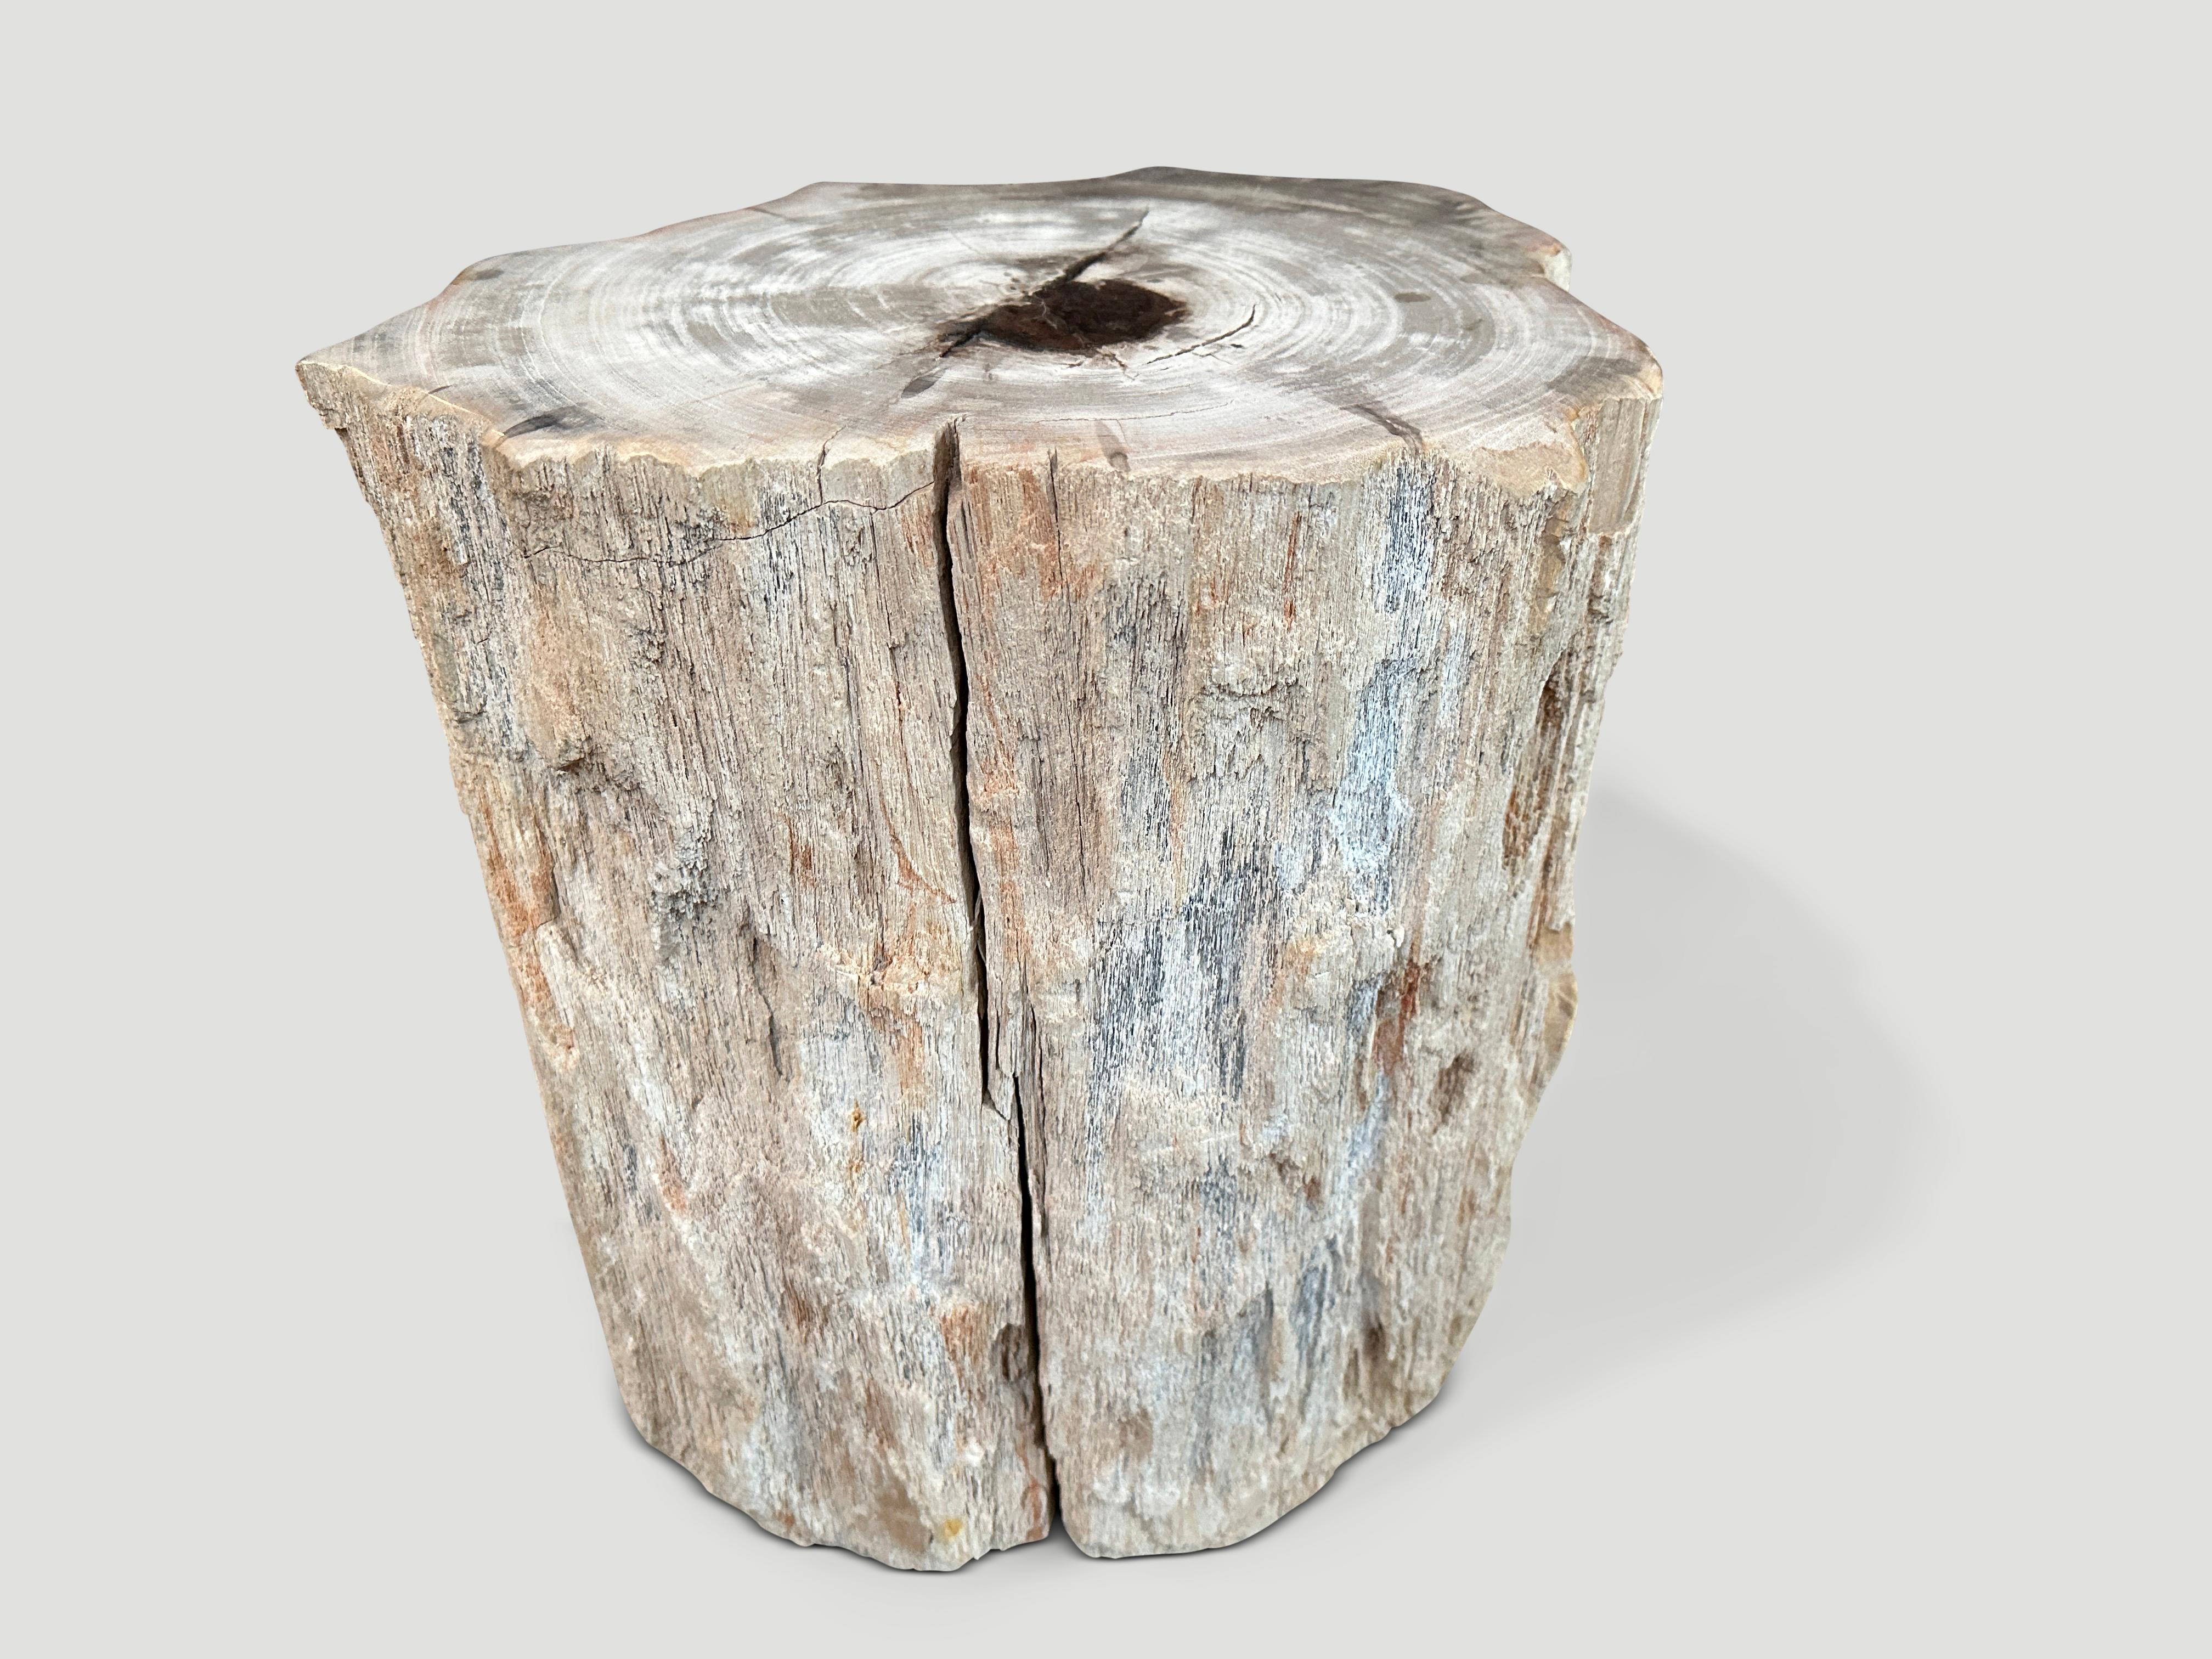 Beautiful neutral tones on this high quality petrified wood side table. A drop of resin was added to the top for usability and to preserve the natural crystals. The sides are left unpolished in contrast. We have a pair cut from the same log. The